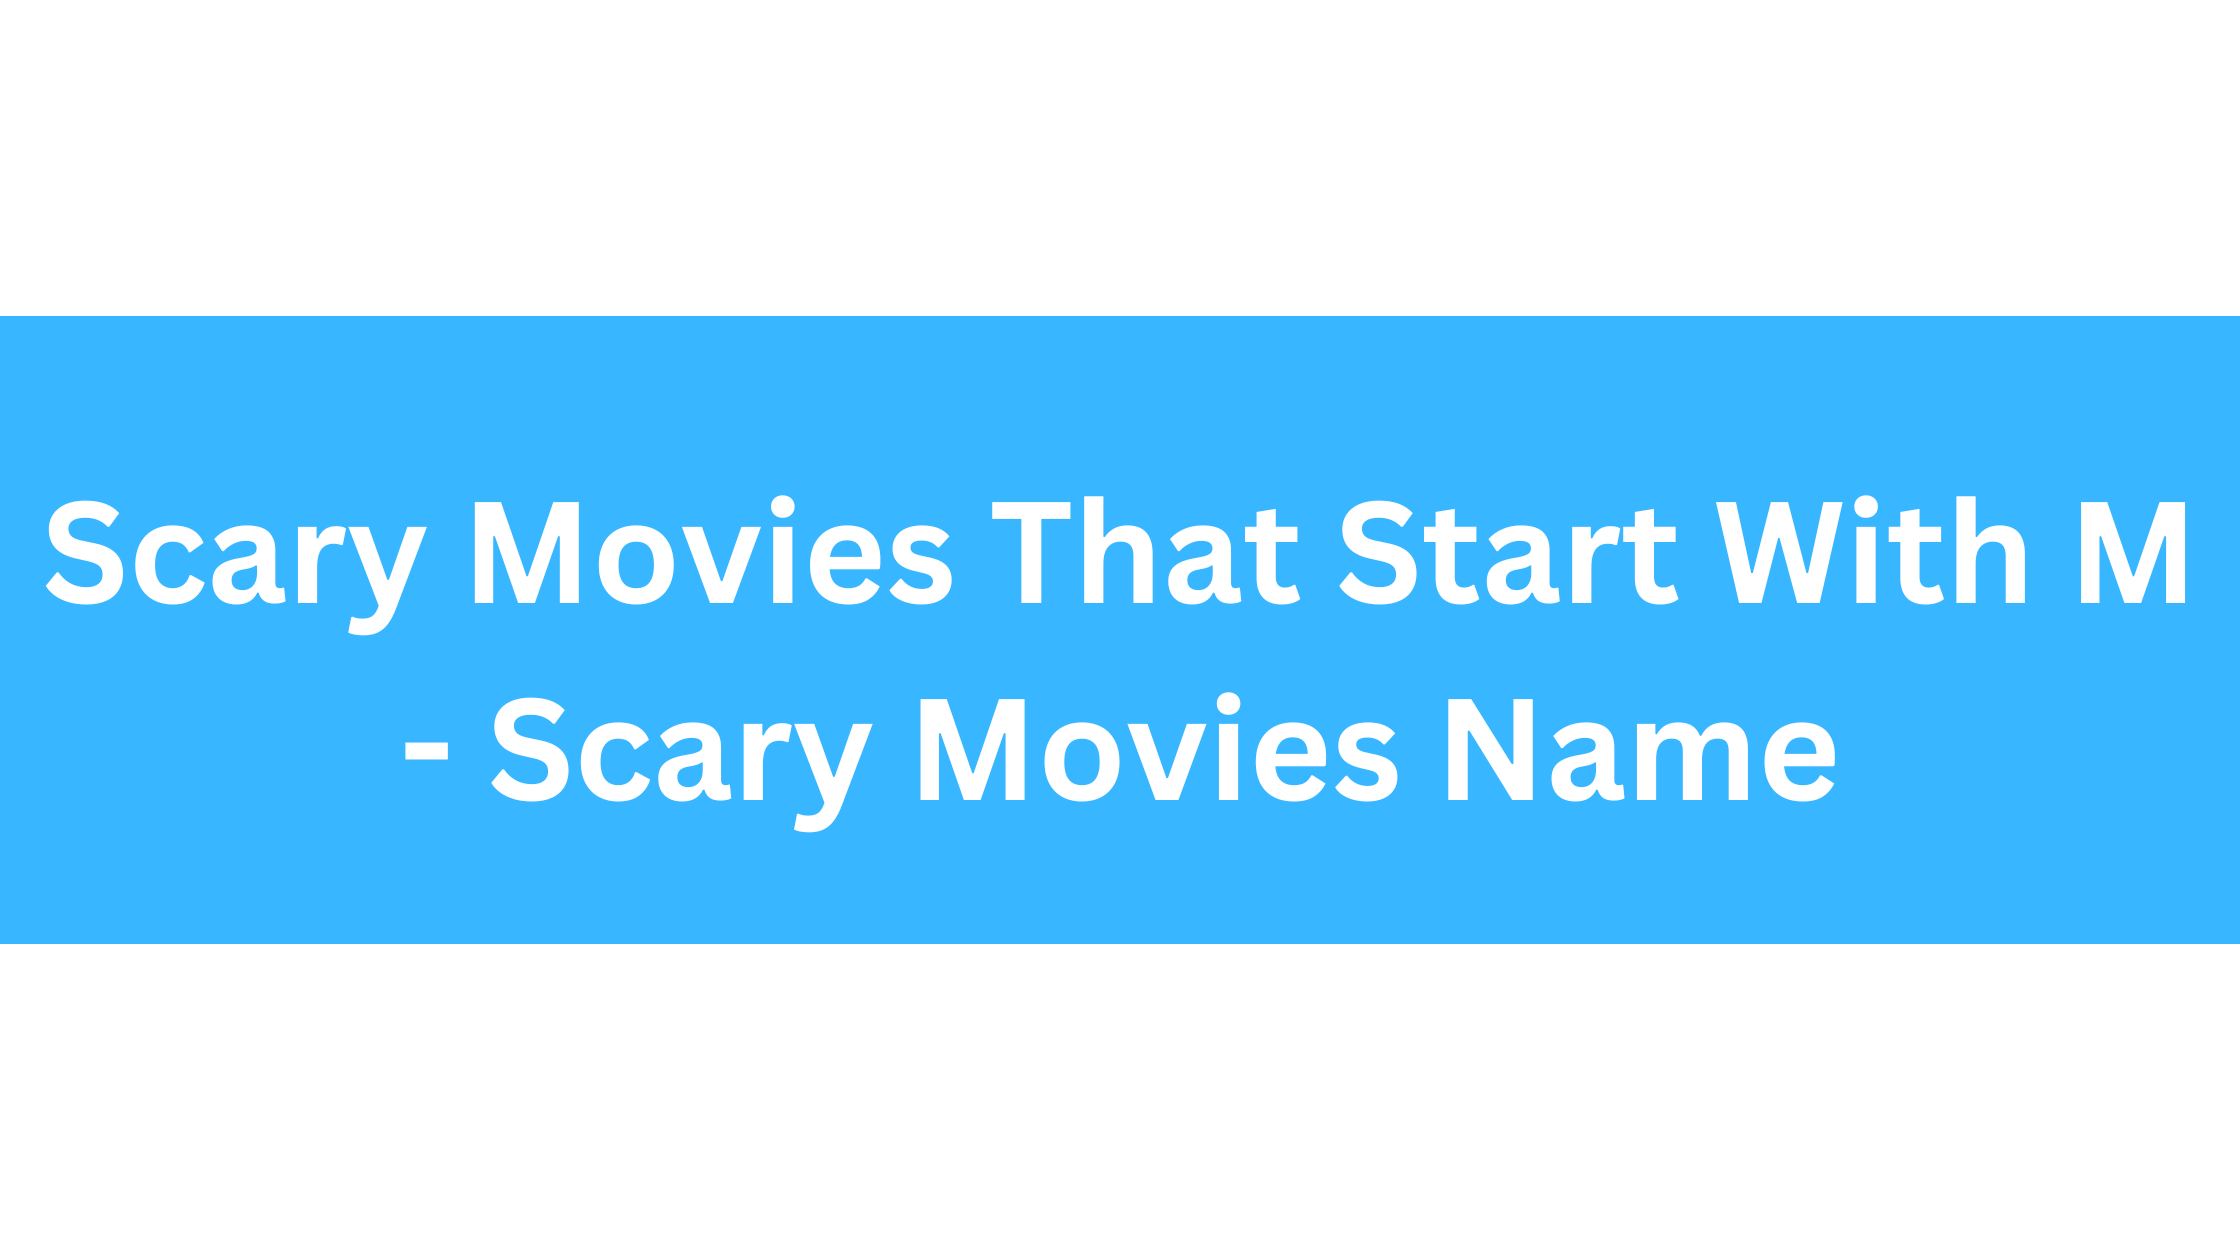 Scary Movies That Start With M